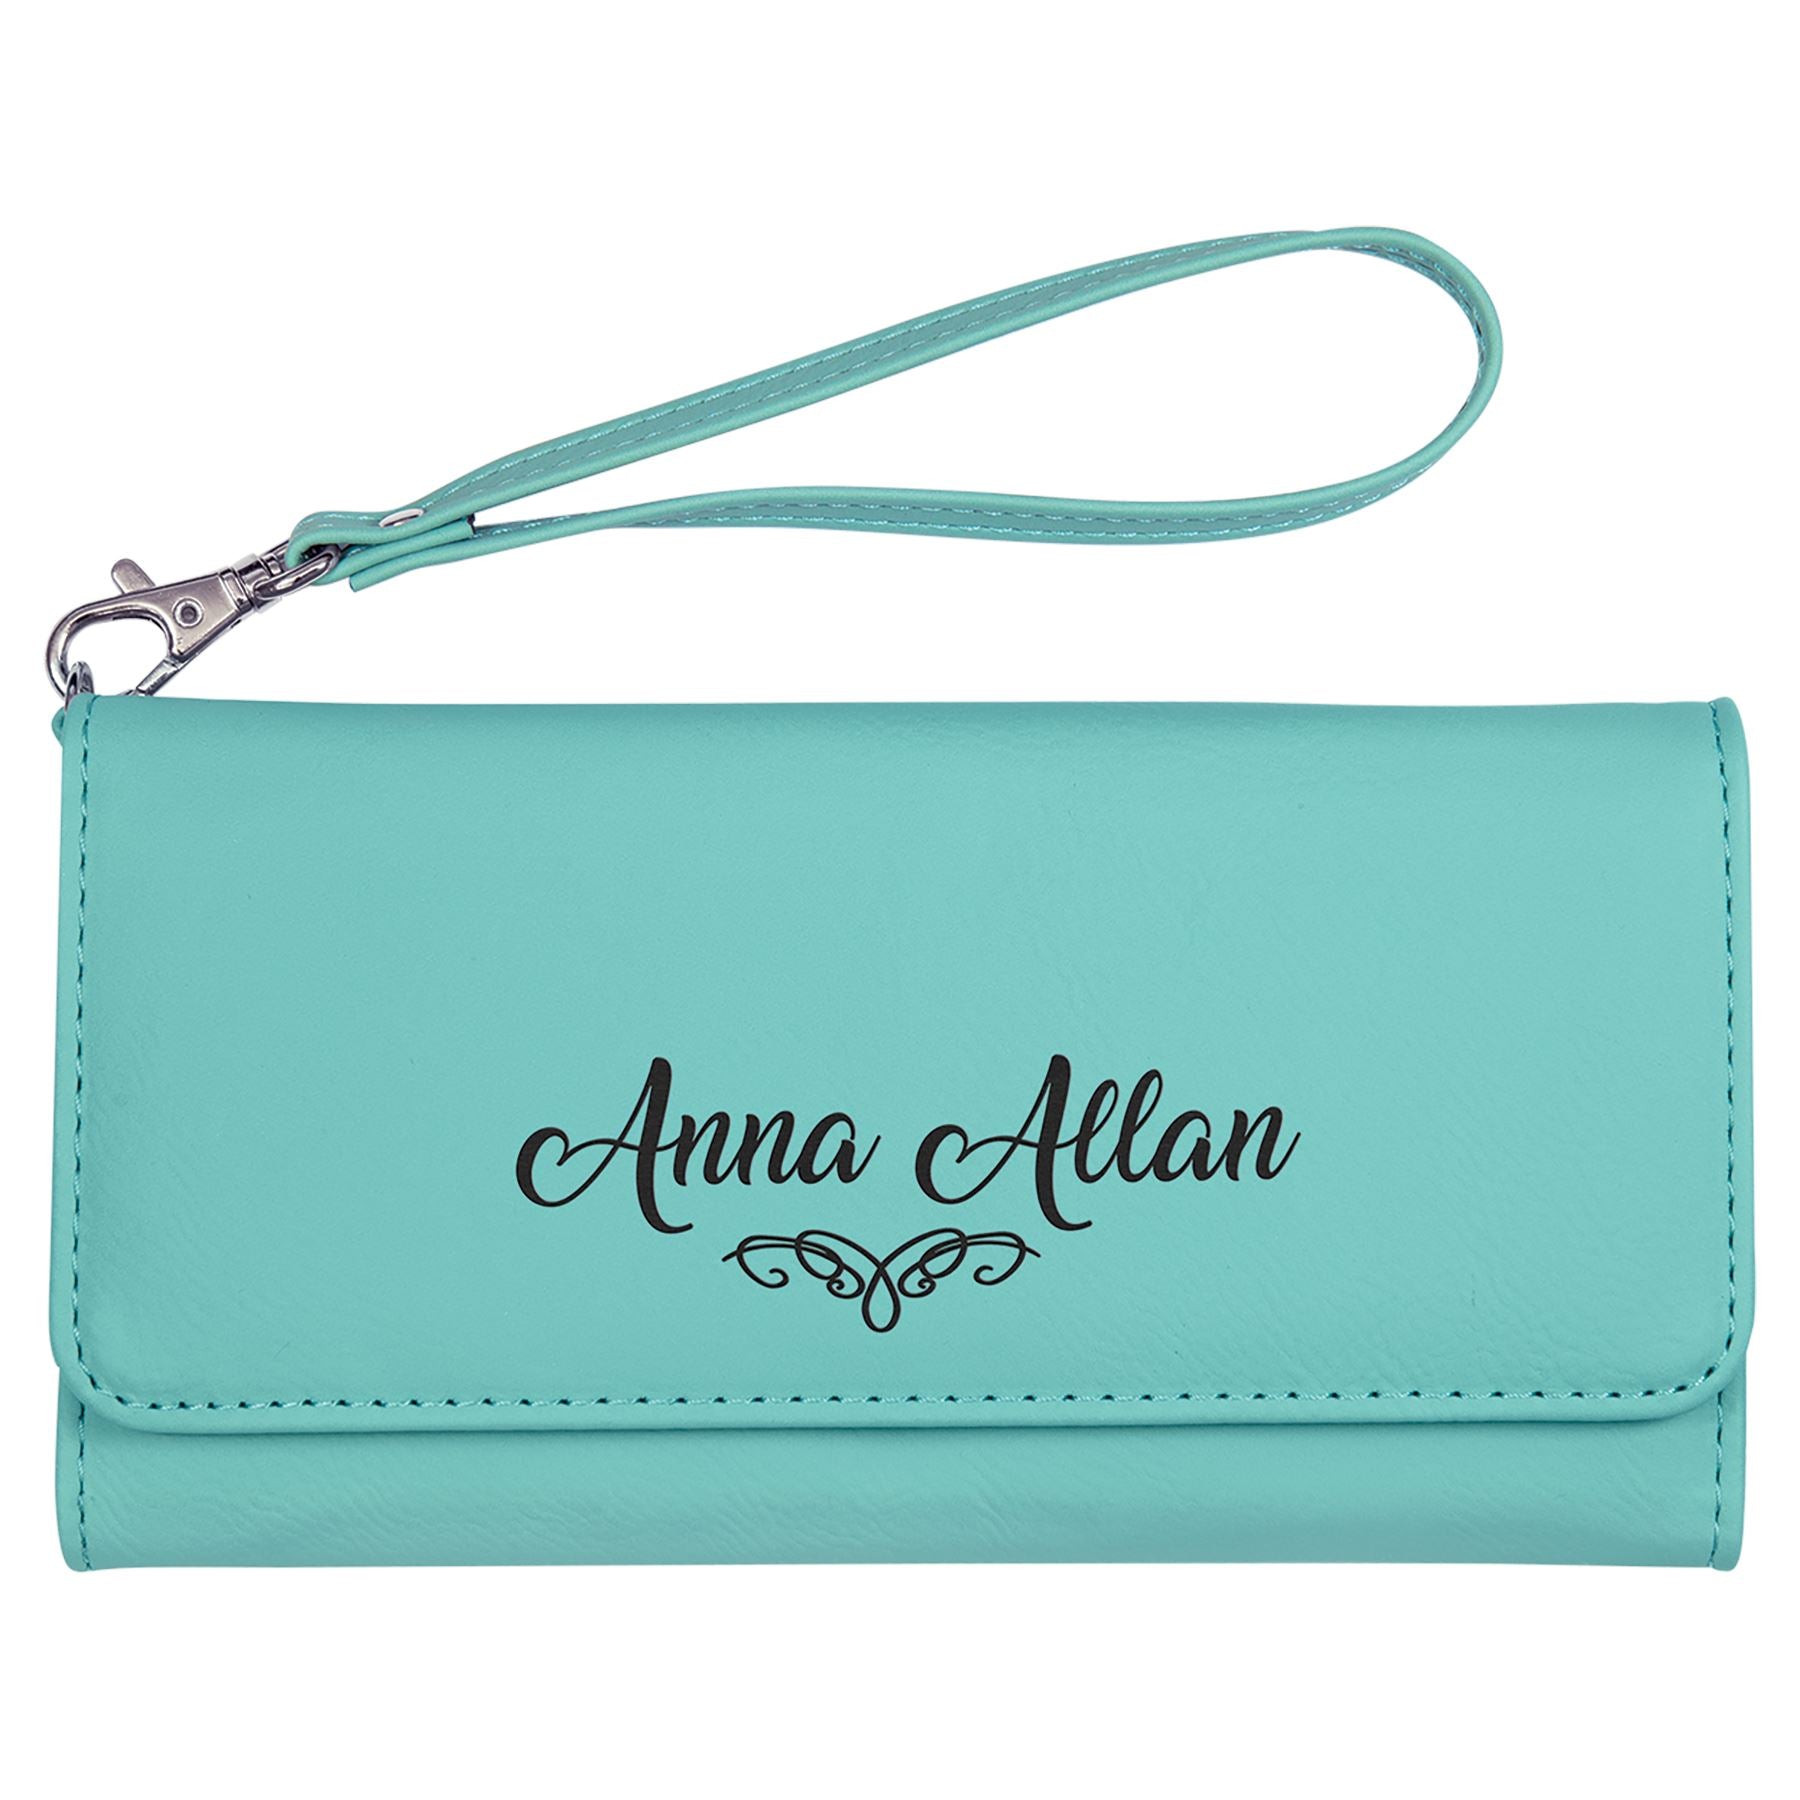 Wallet w/Strap, Laserable Leatherette, Laser Engraved Wallets Craftworks NW Teal/Black Front Only Small